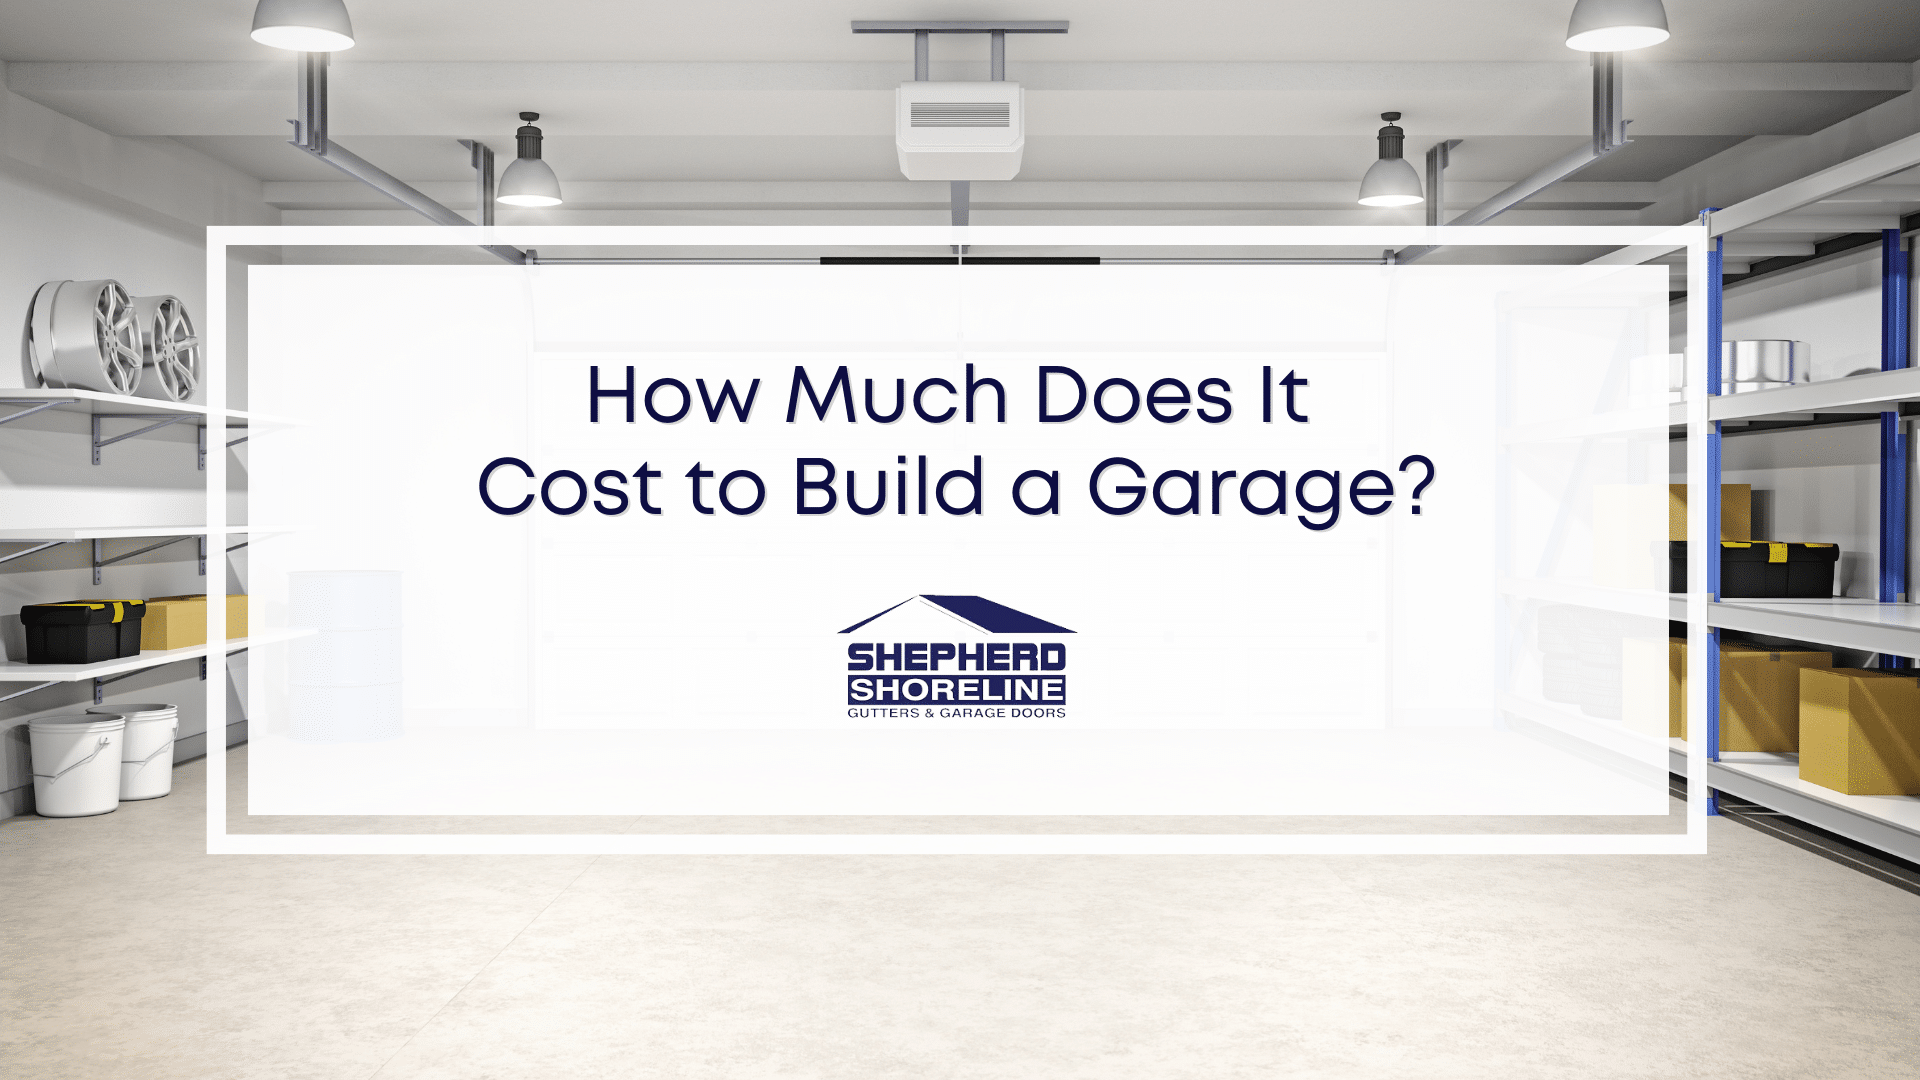 Featured image of how much does it cost to build a garage?